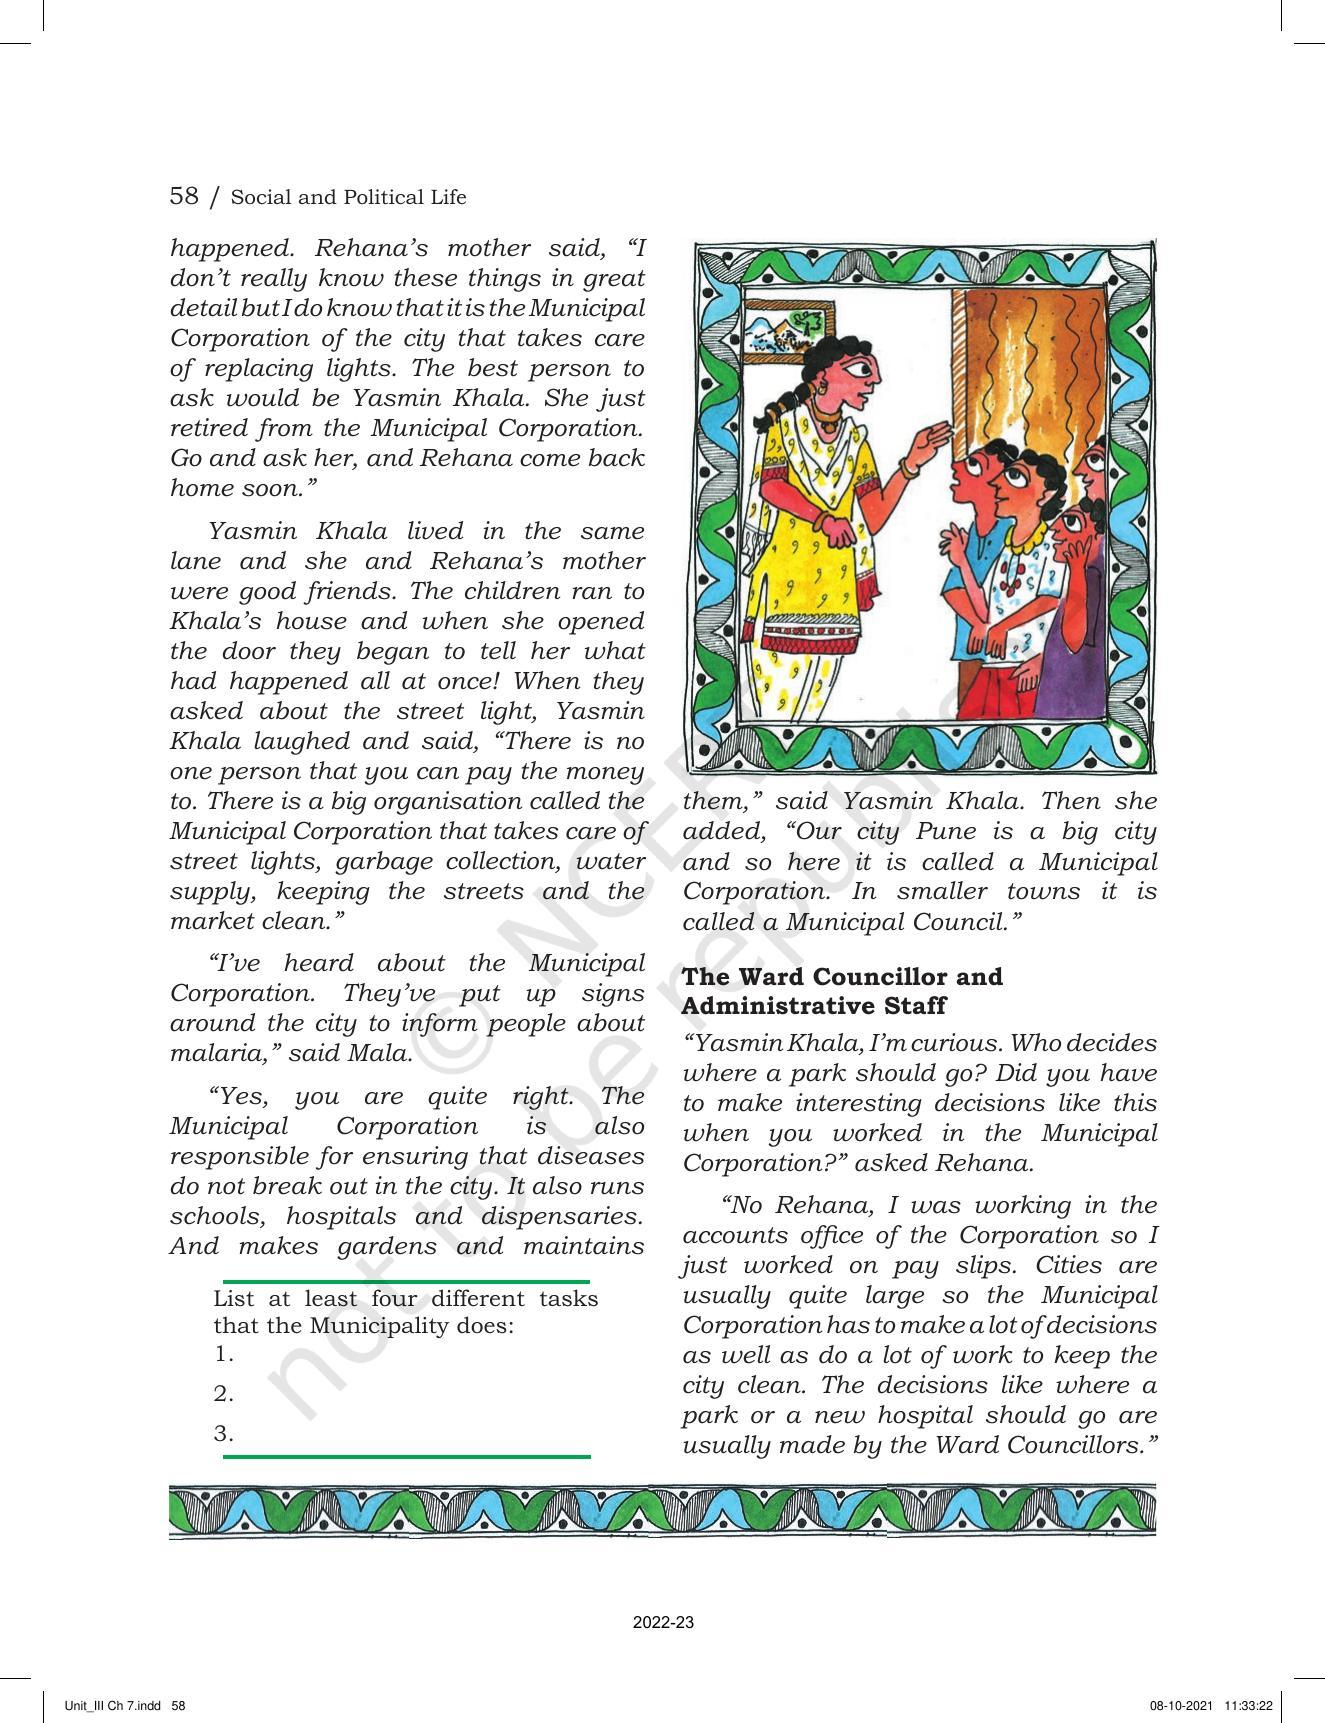 NCERT Book for Class 6 Social Science(Political Science) : Chapter 7-Urban Administration - Page 2